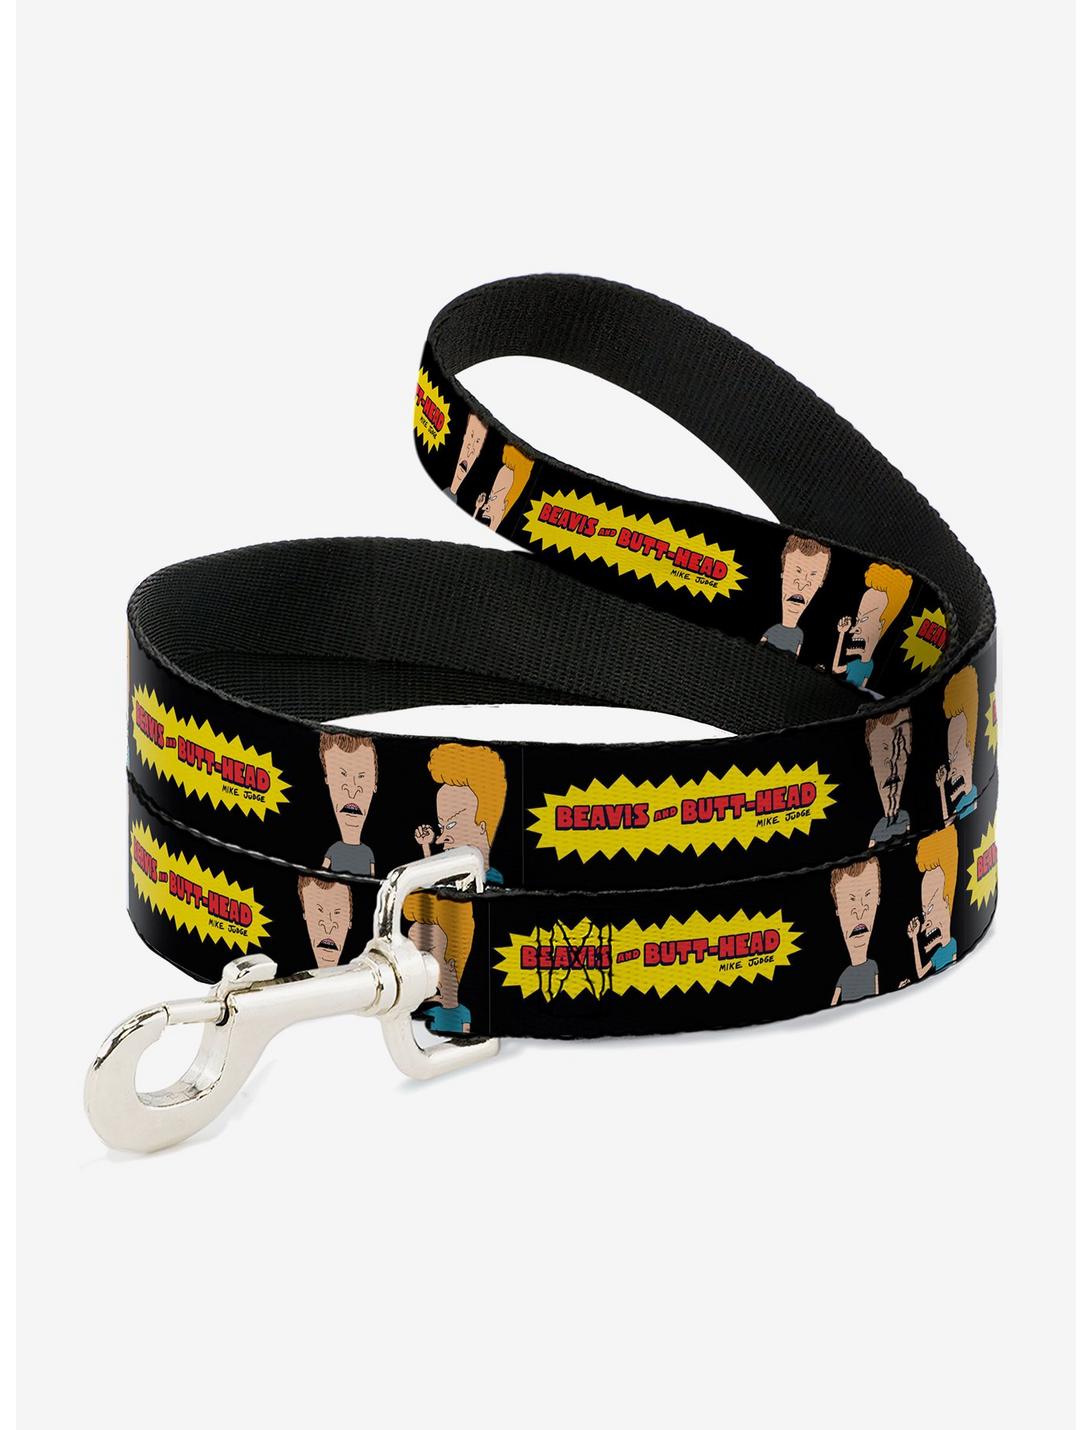 Beavis and Butt-Head Title Logo and Pose Dog Leash, BLACK, hi-res